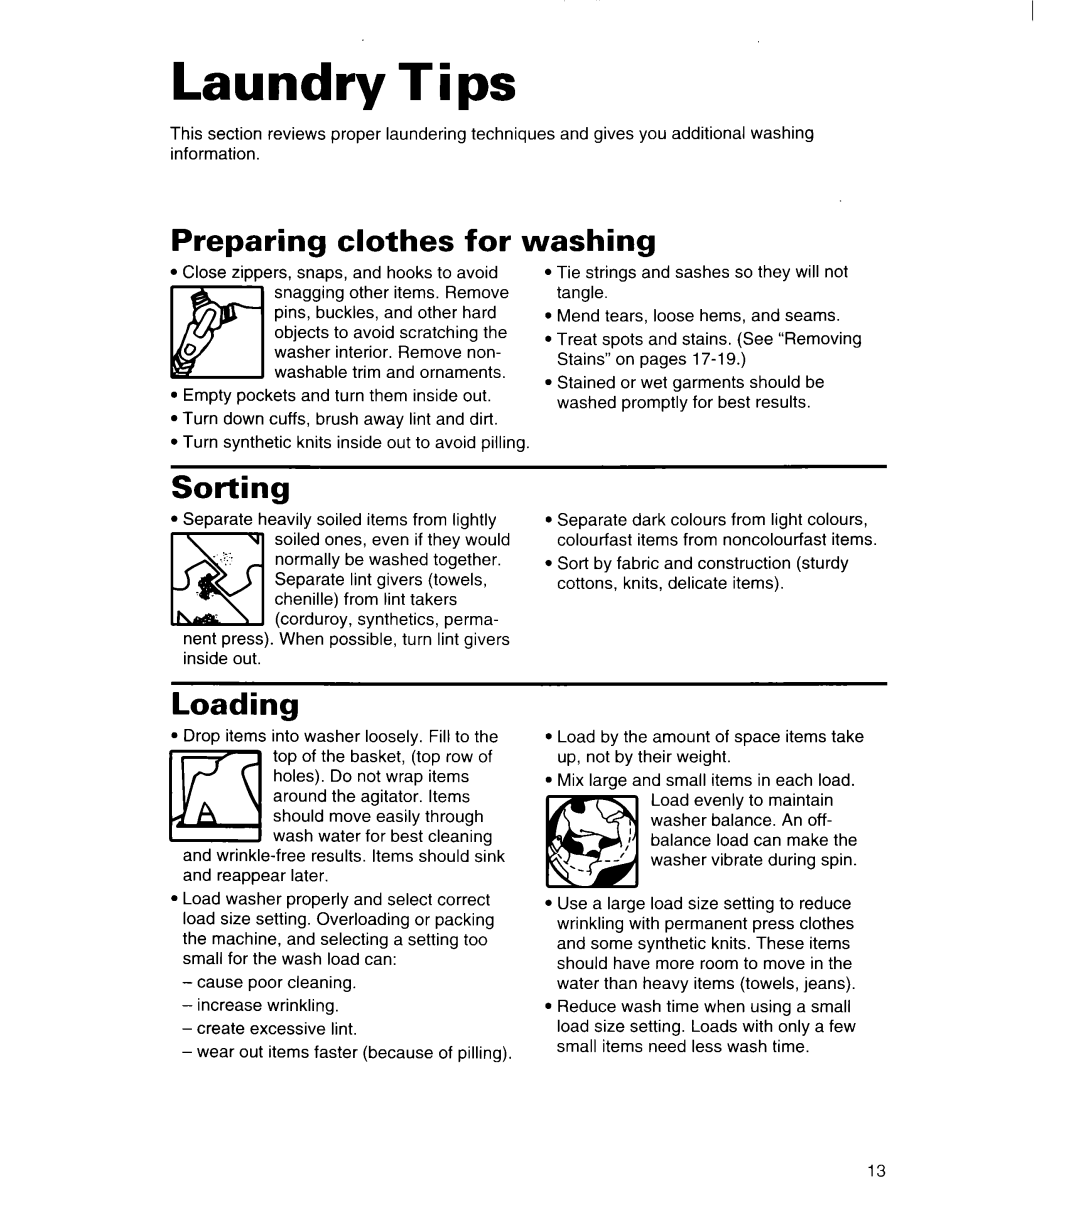 Whirlpool 3363834 warranty Laundry Tips, Preparing clothes for, washing, Sorting, Loading 